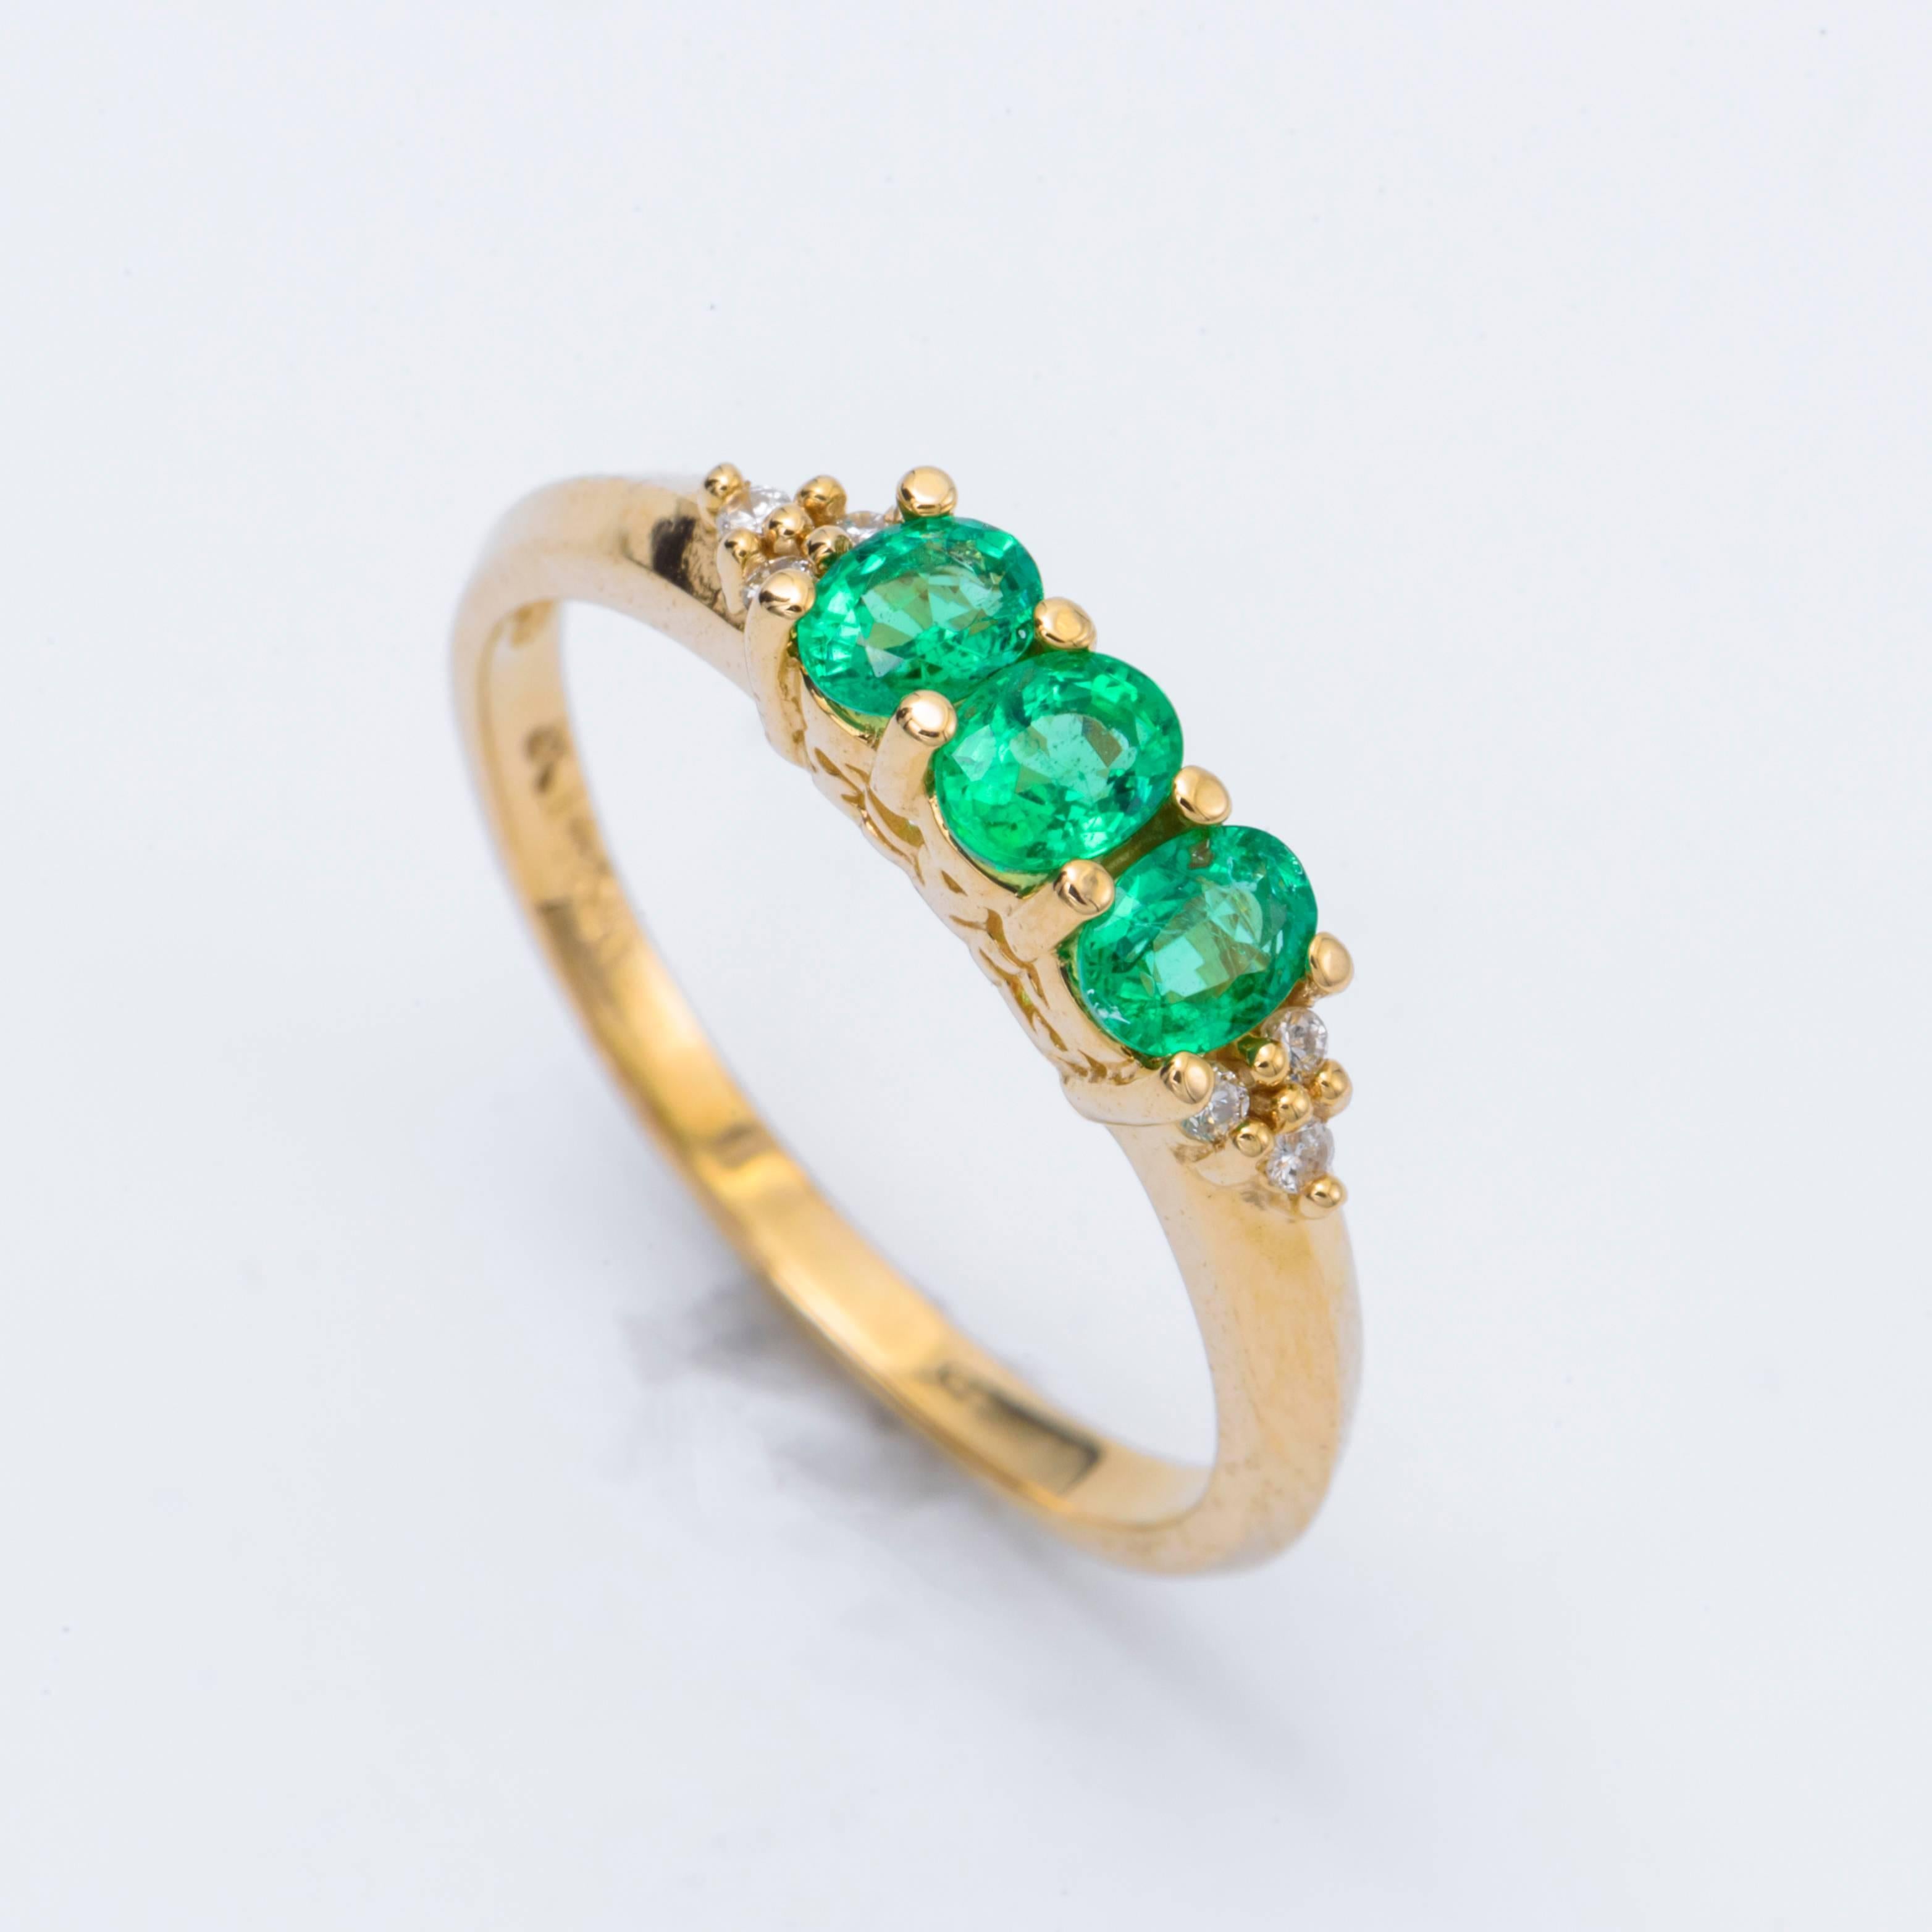 Contemporary Oval Emerald Tree Stone Ring and Diamond Accent 14 Karat Yellow Gold Band